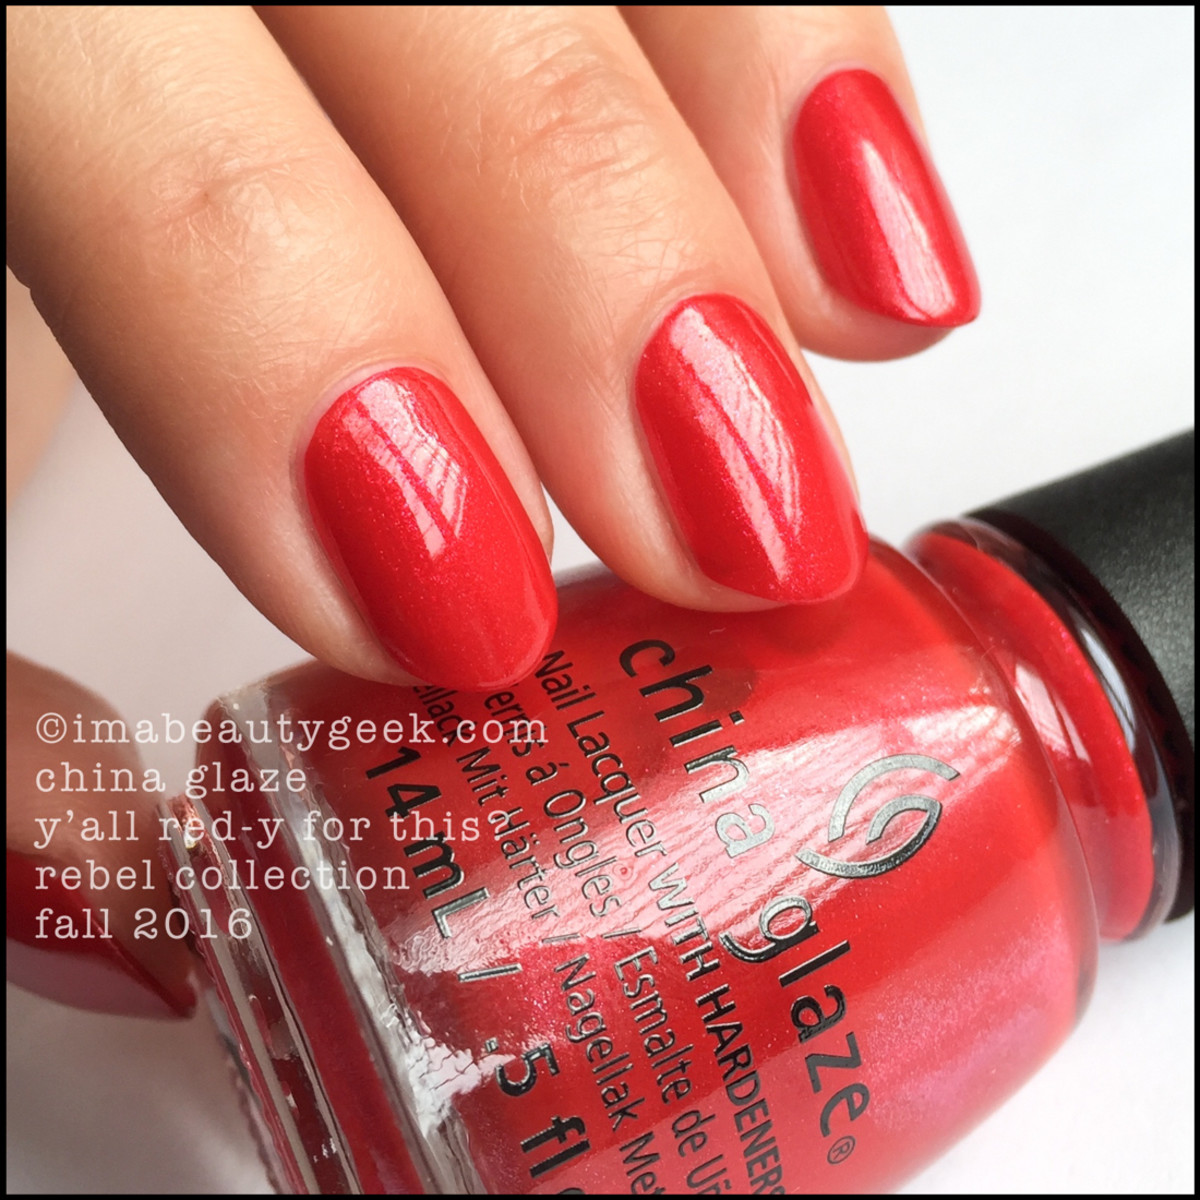 China Glaze Yall Redy For This_China Glaze Rebel 2016 Collection Swatches Review